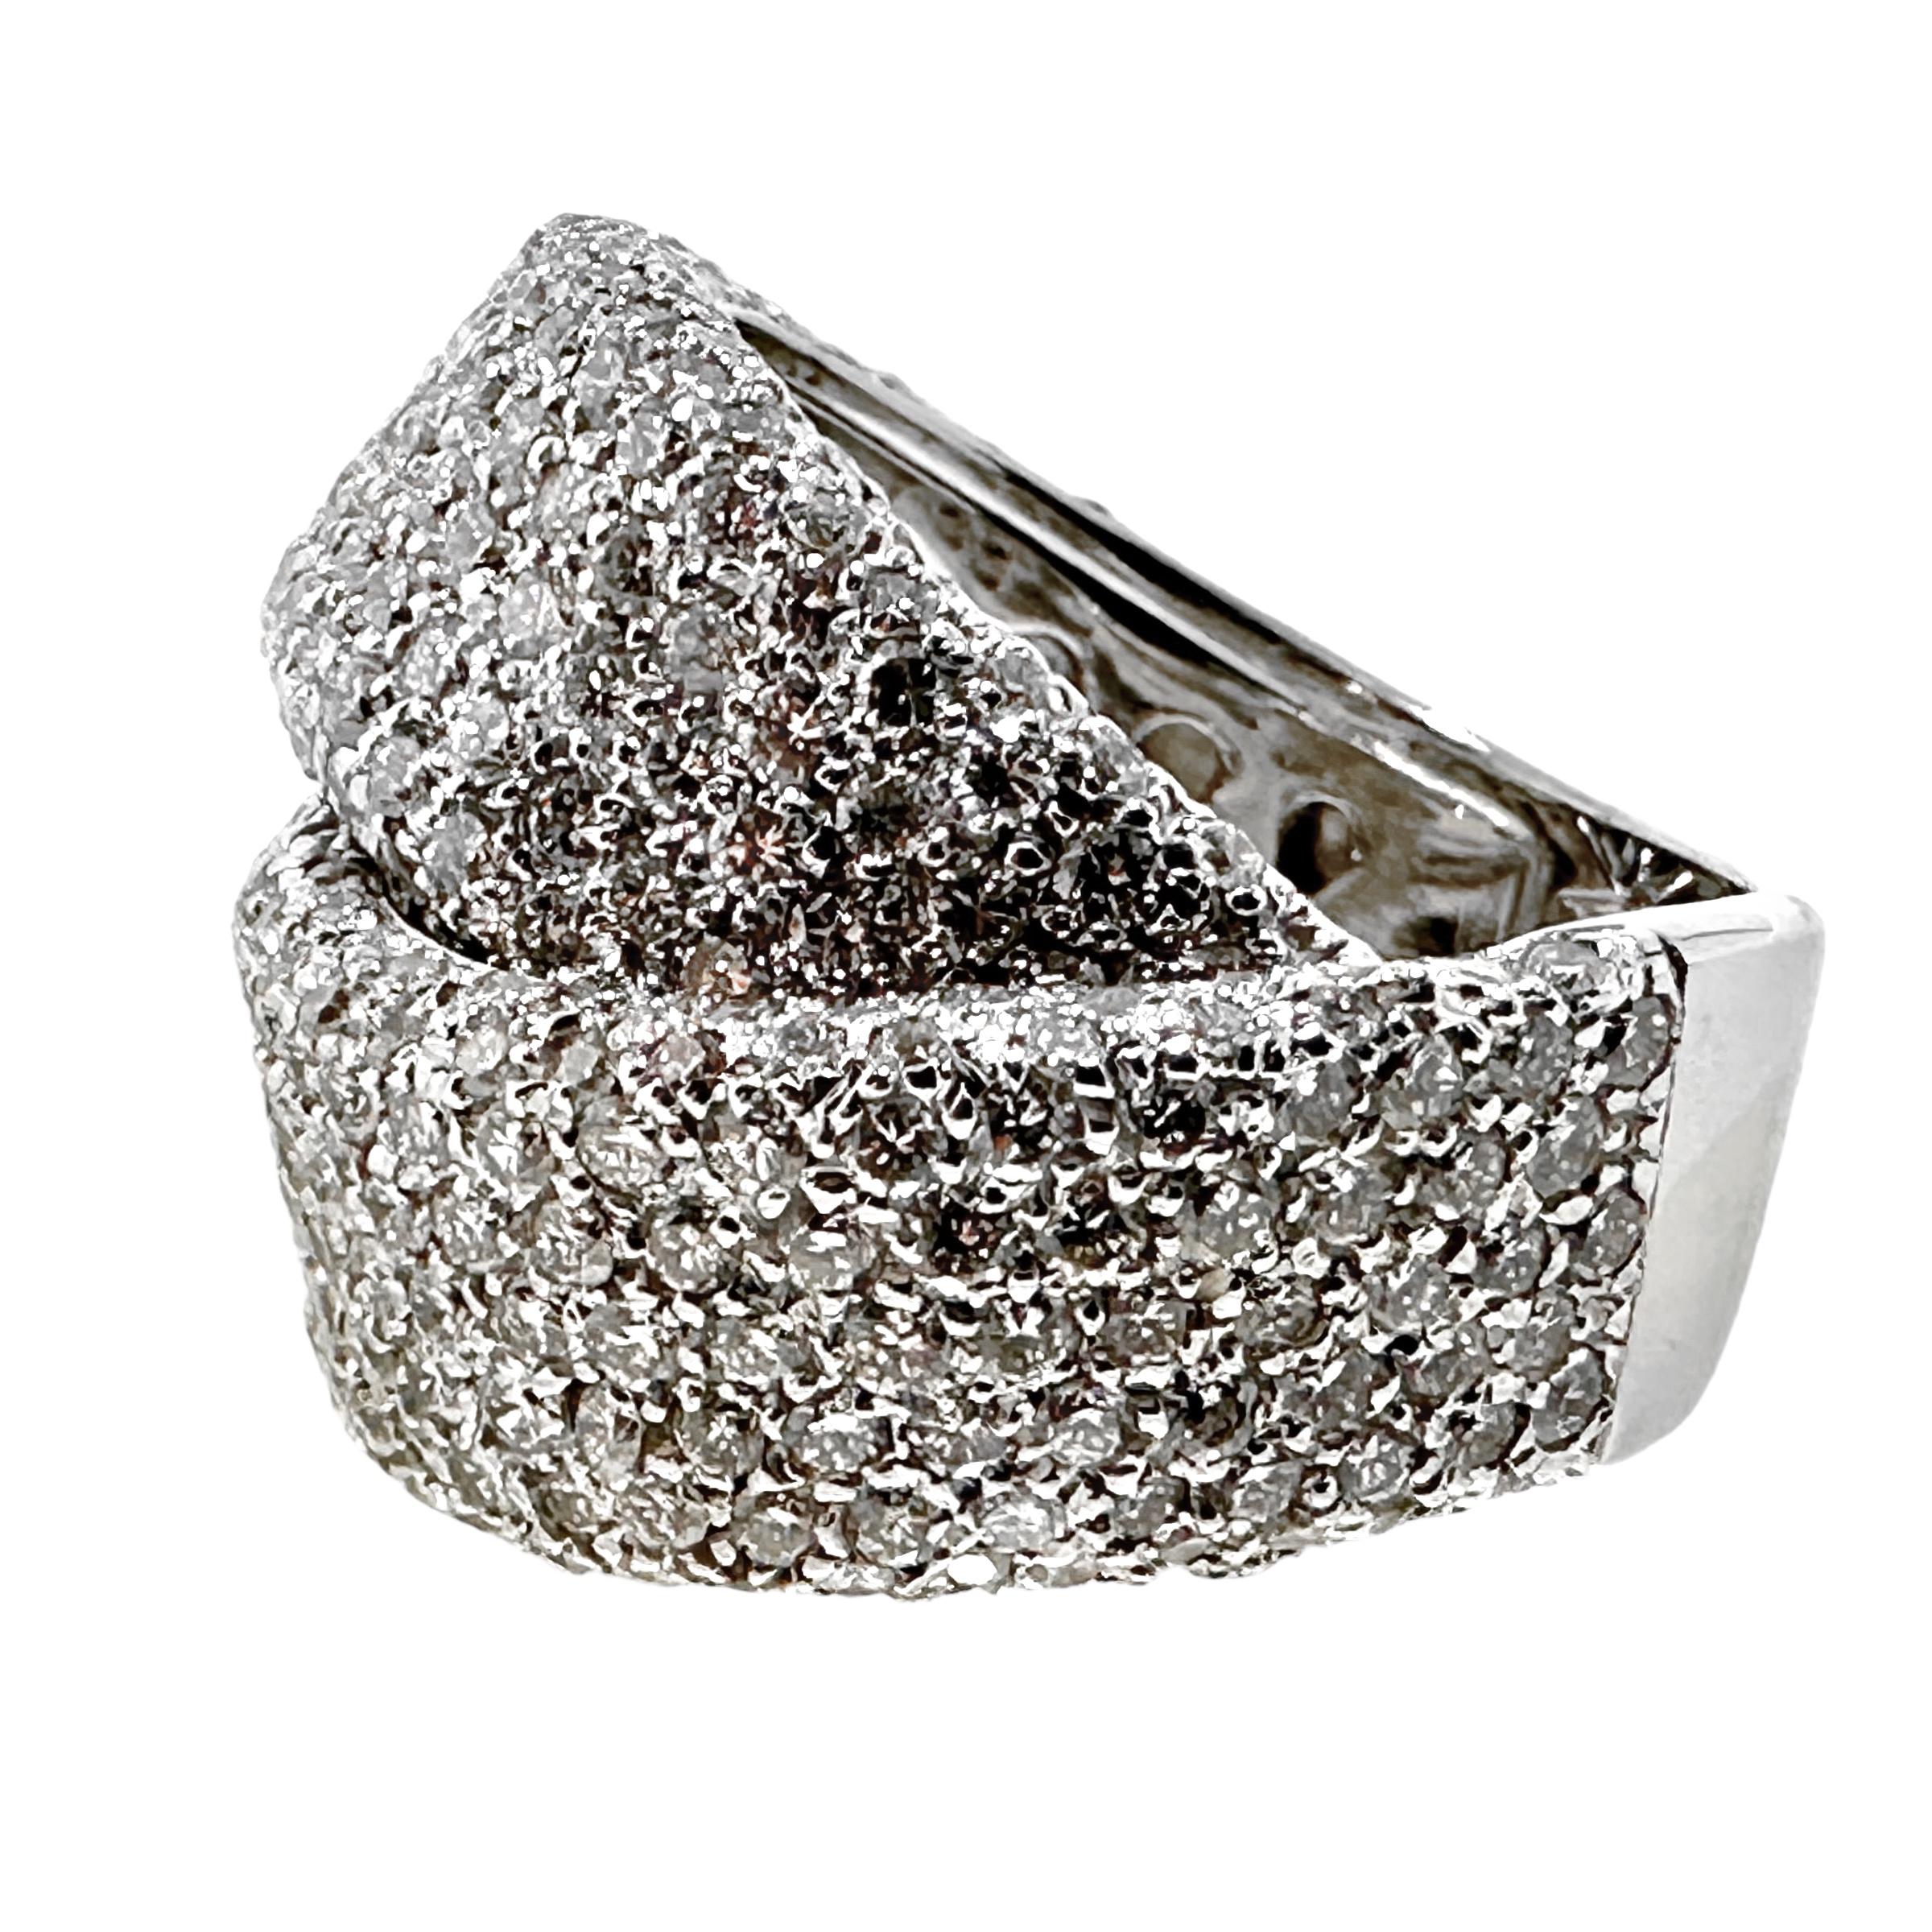 Brilliant Cut Luxurious 18K White Gold & Diamond Encrusted Bypass Dome Ring with Italian Flair For Sale